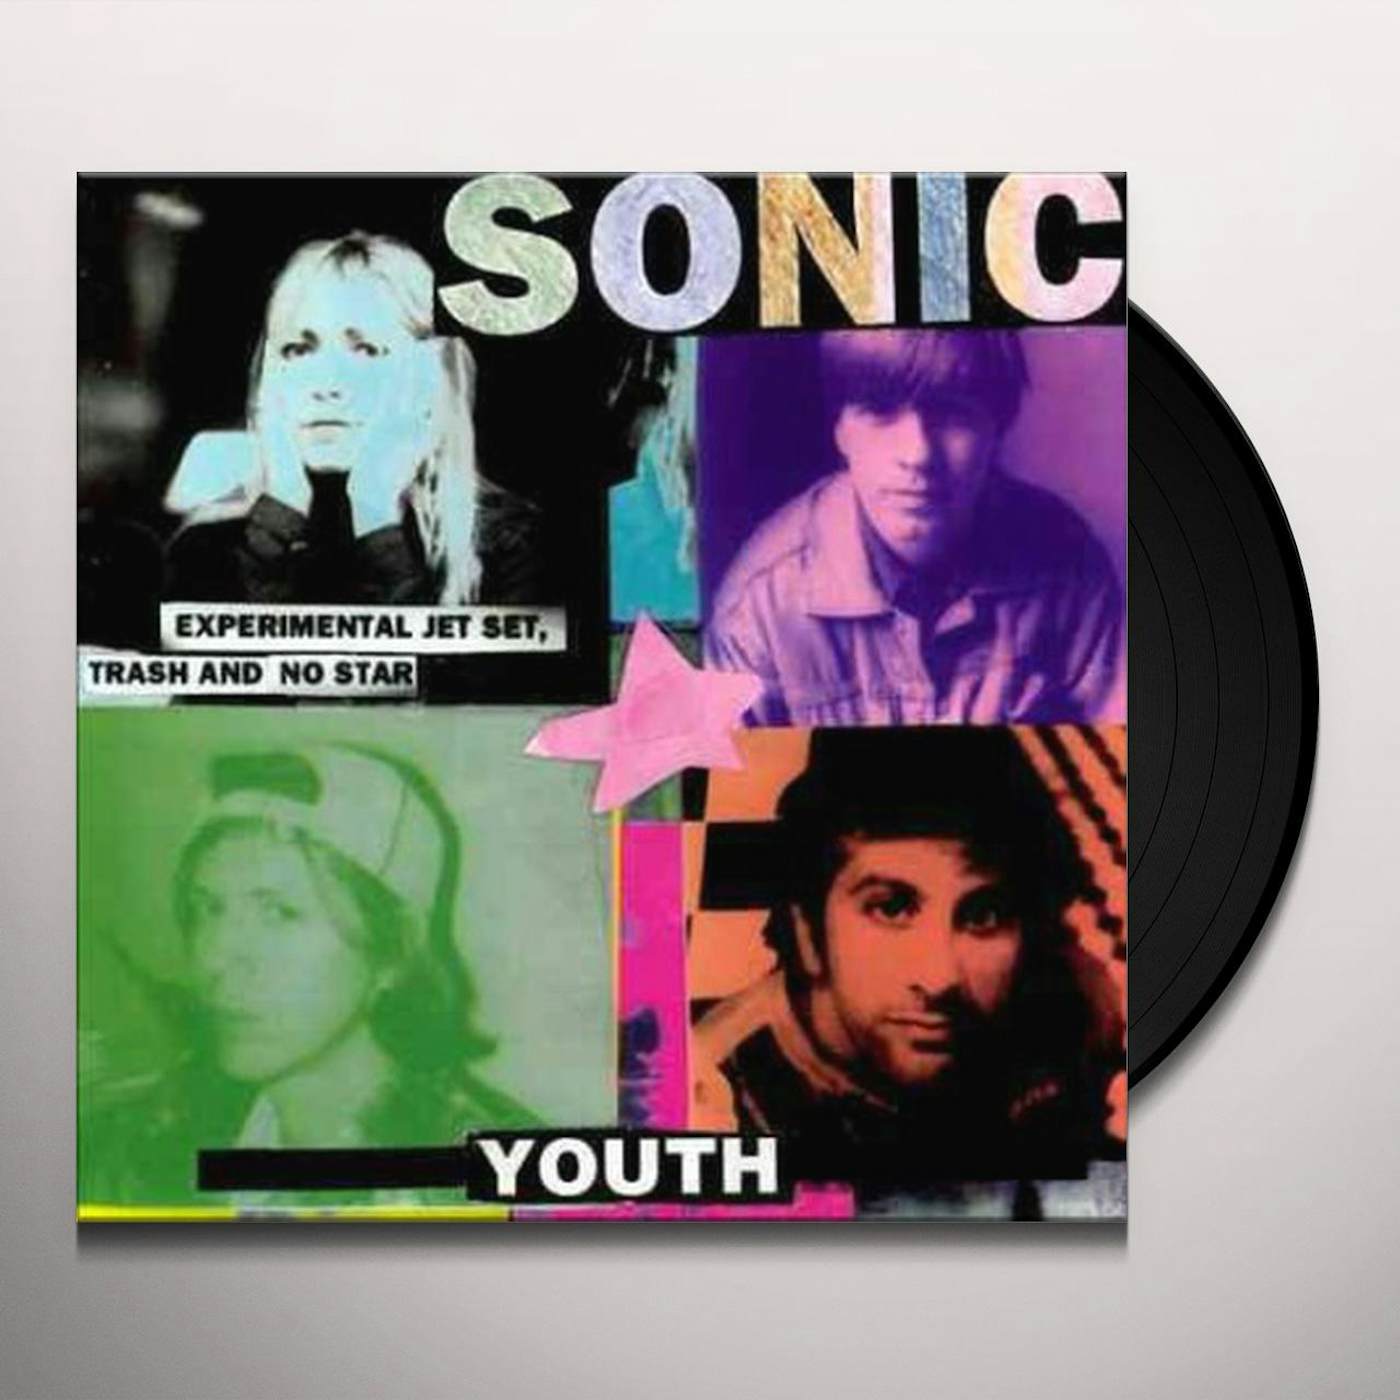 Sonic Youth EXPERIMENTAL JET SET TRASH AND NO STAR Vinyl Record